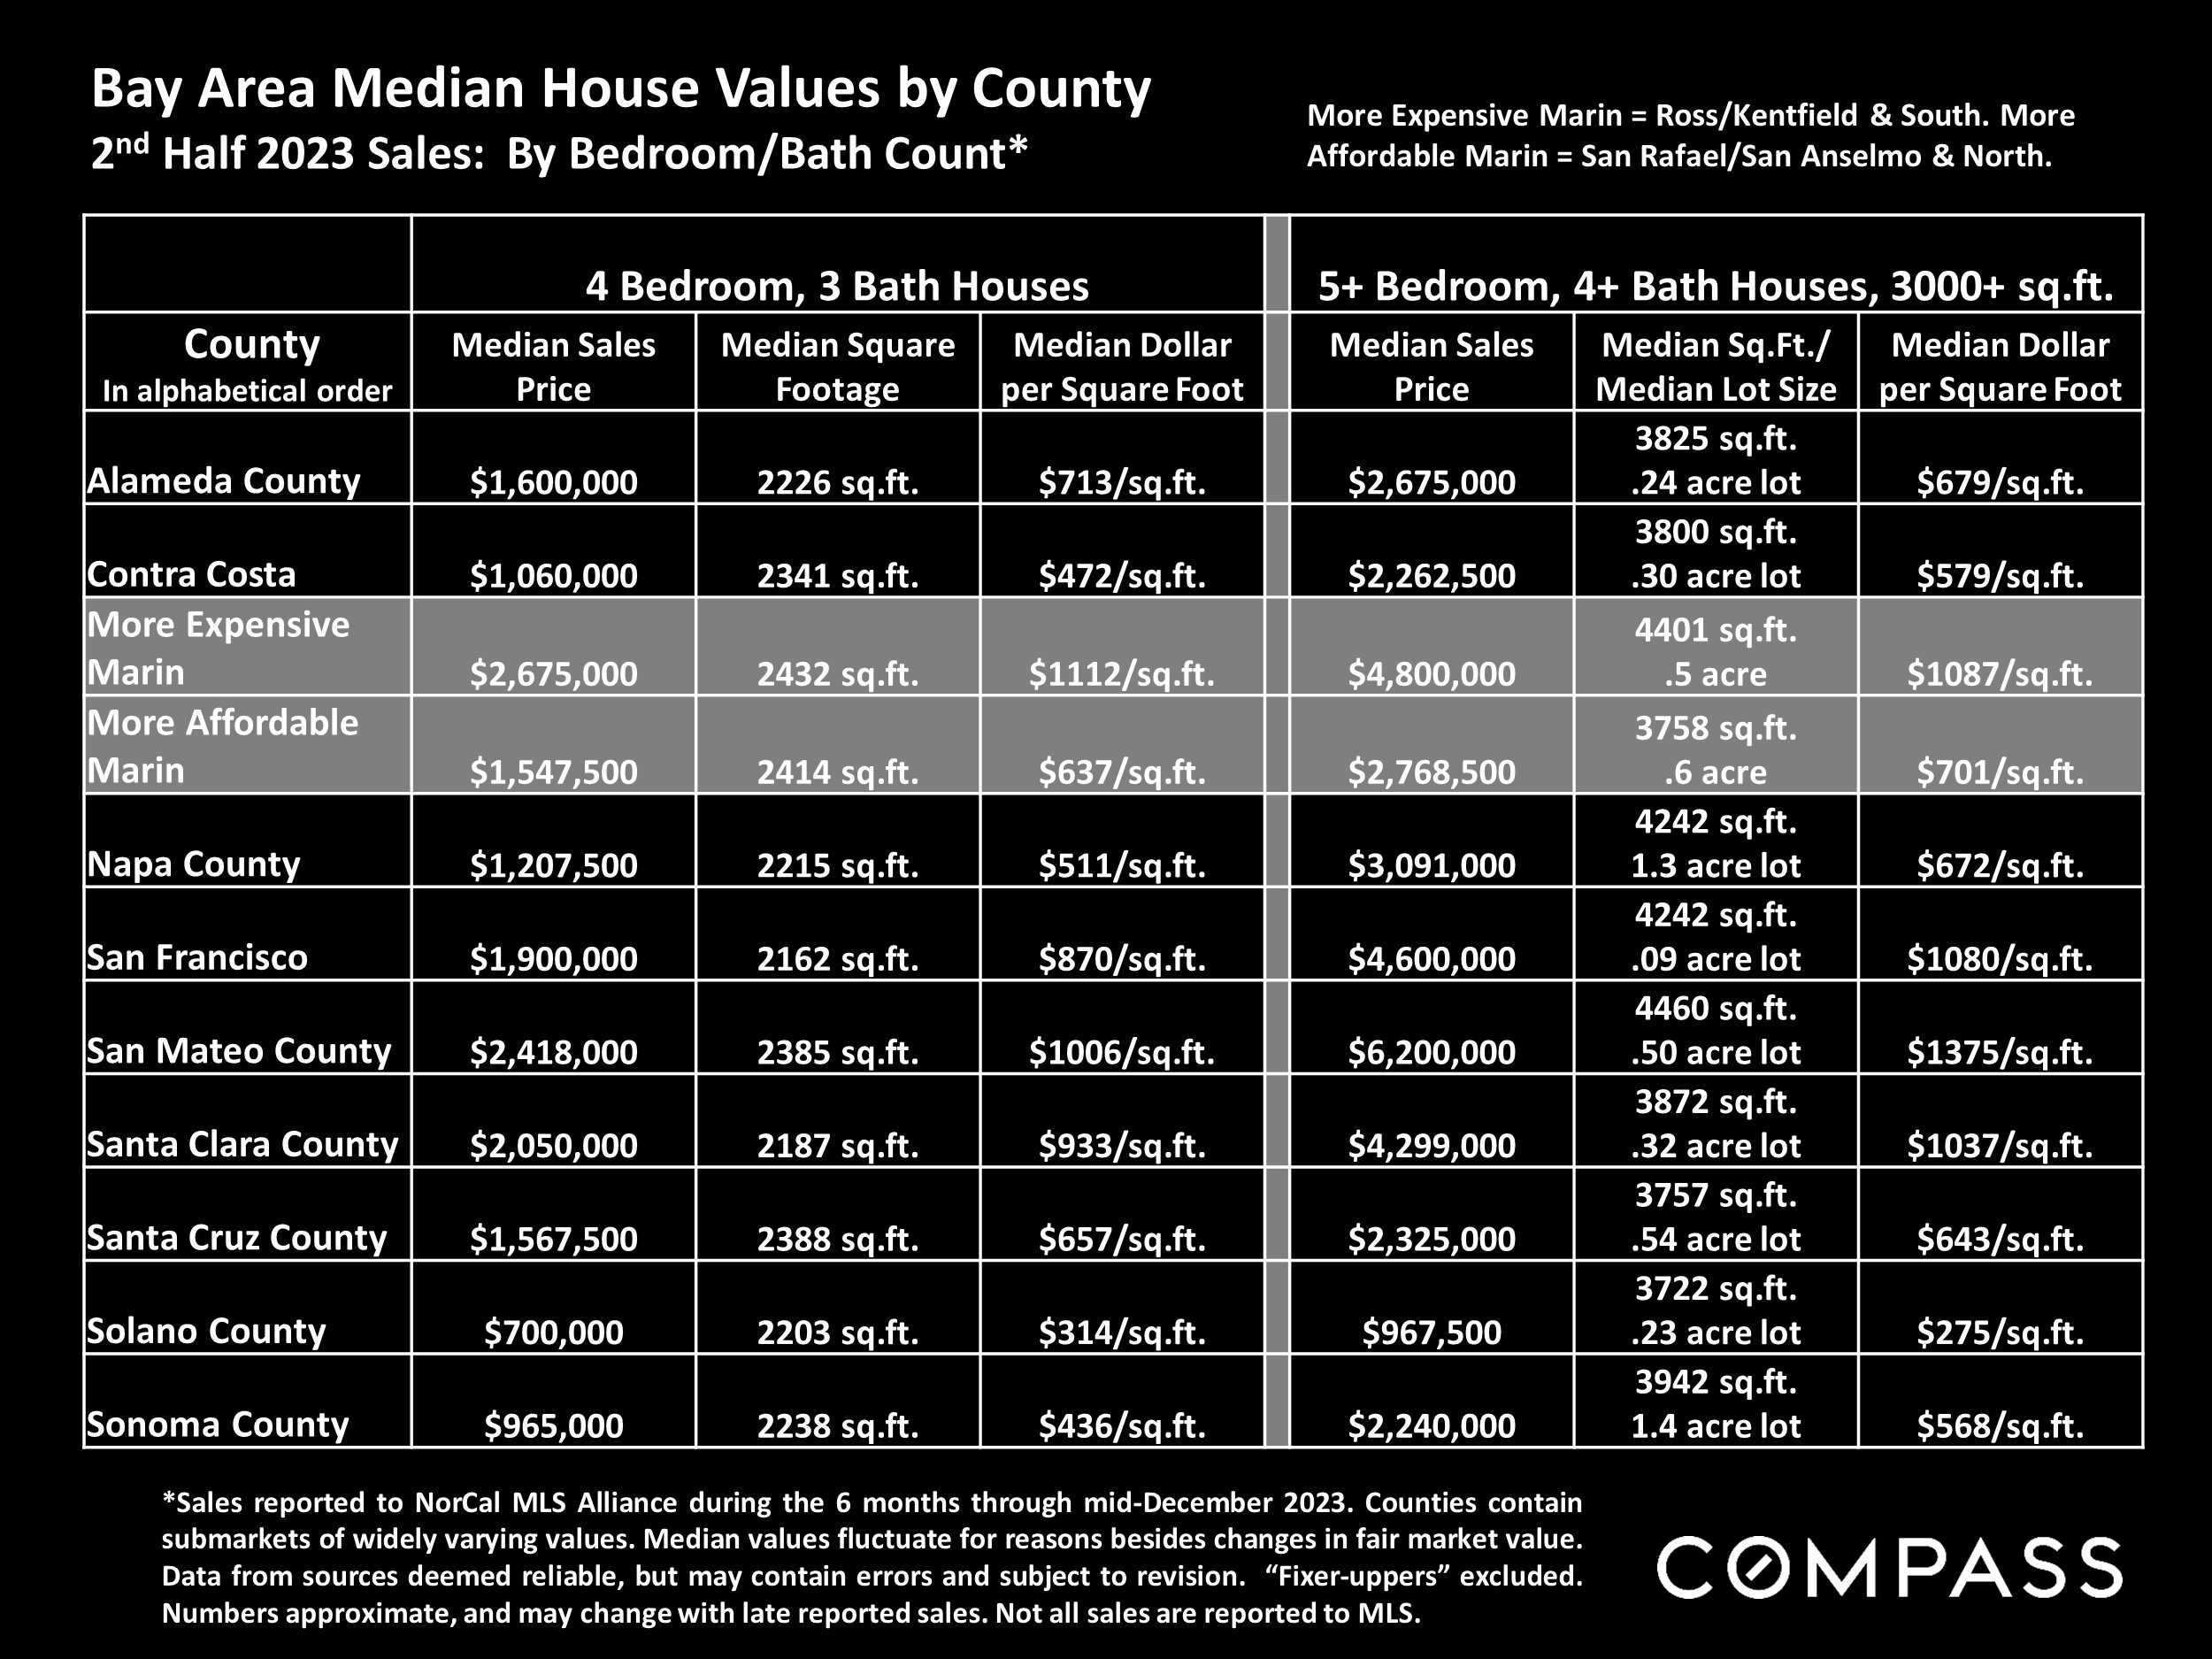 Bay Area Median House Values by County 2nd Half 2023 Sales: By Bedroom/Bath Count*